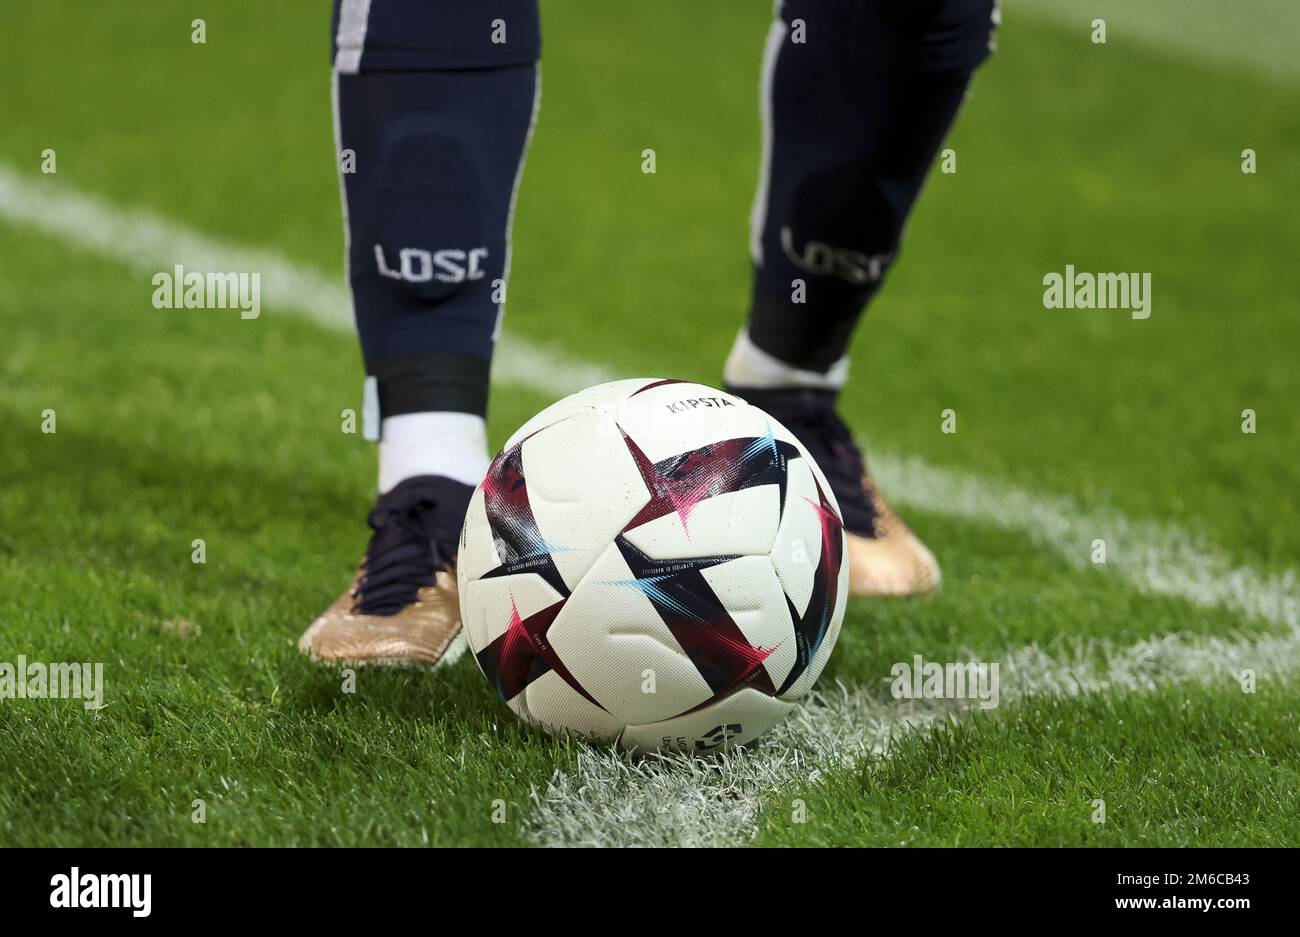 Kipsta by Decathlon official matchball during the French championship Ligue  1 football match between LOSC Lille (LOSC) and Stade de Reims on January 2,  2023 at Stade Pierre Mauroy in Villeneuve-d'Ascq near